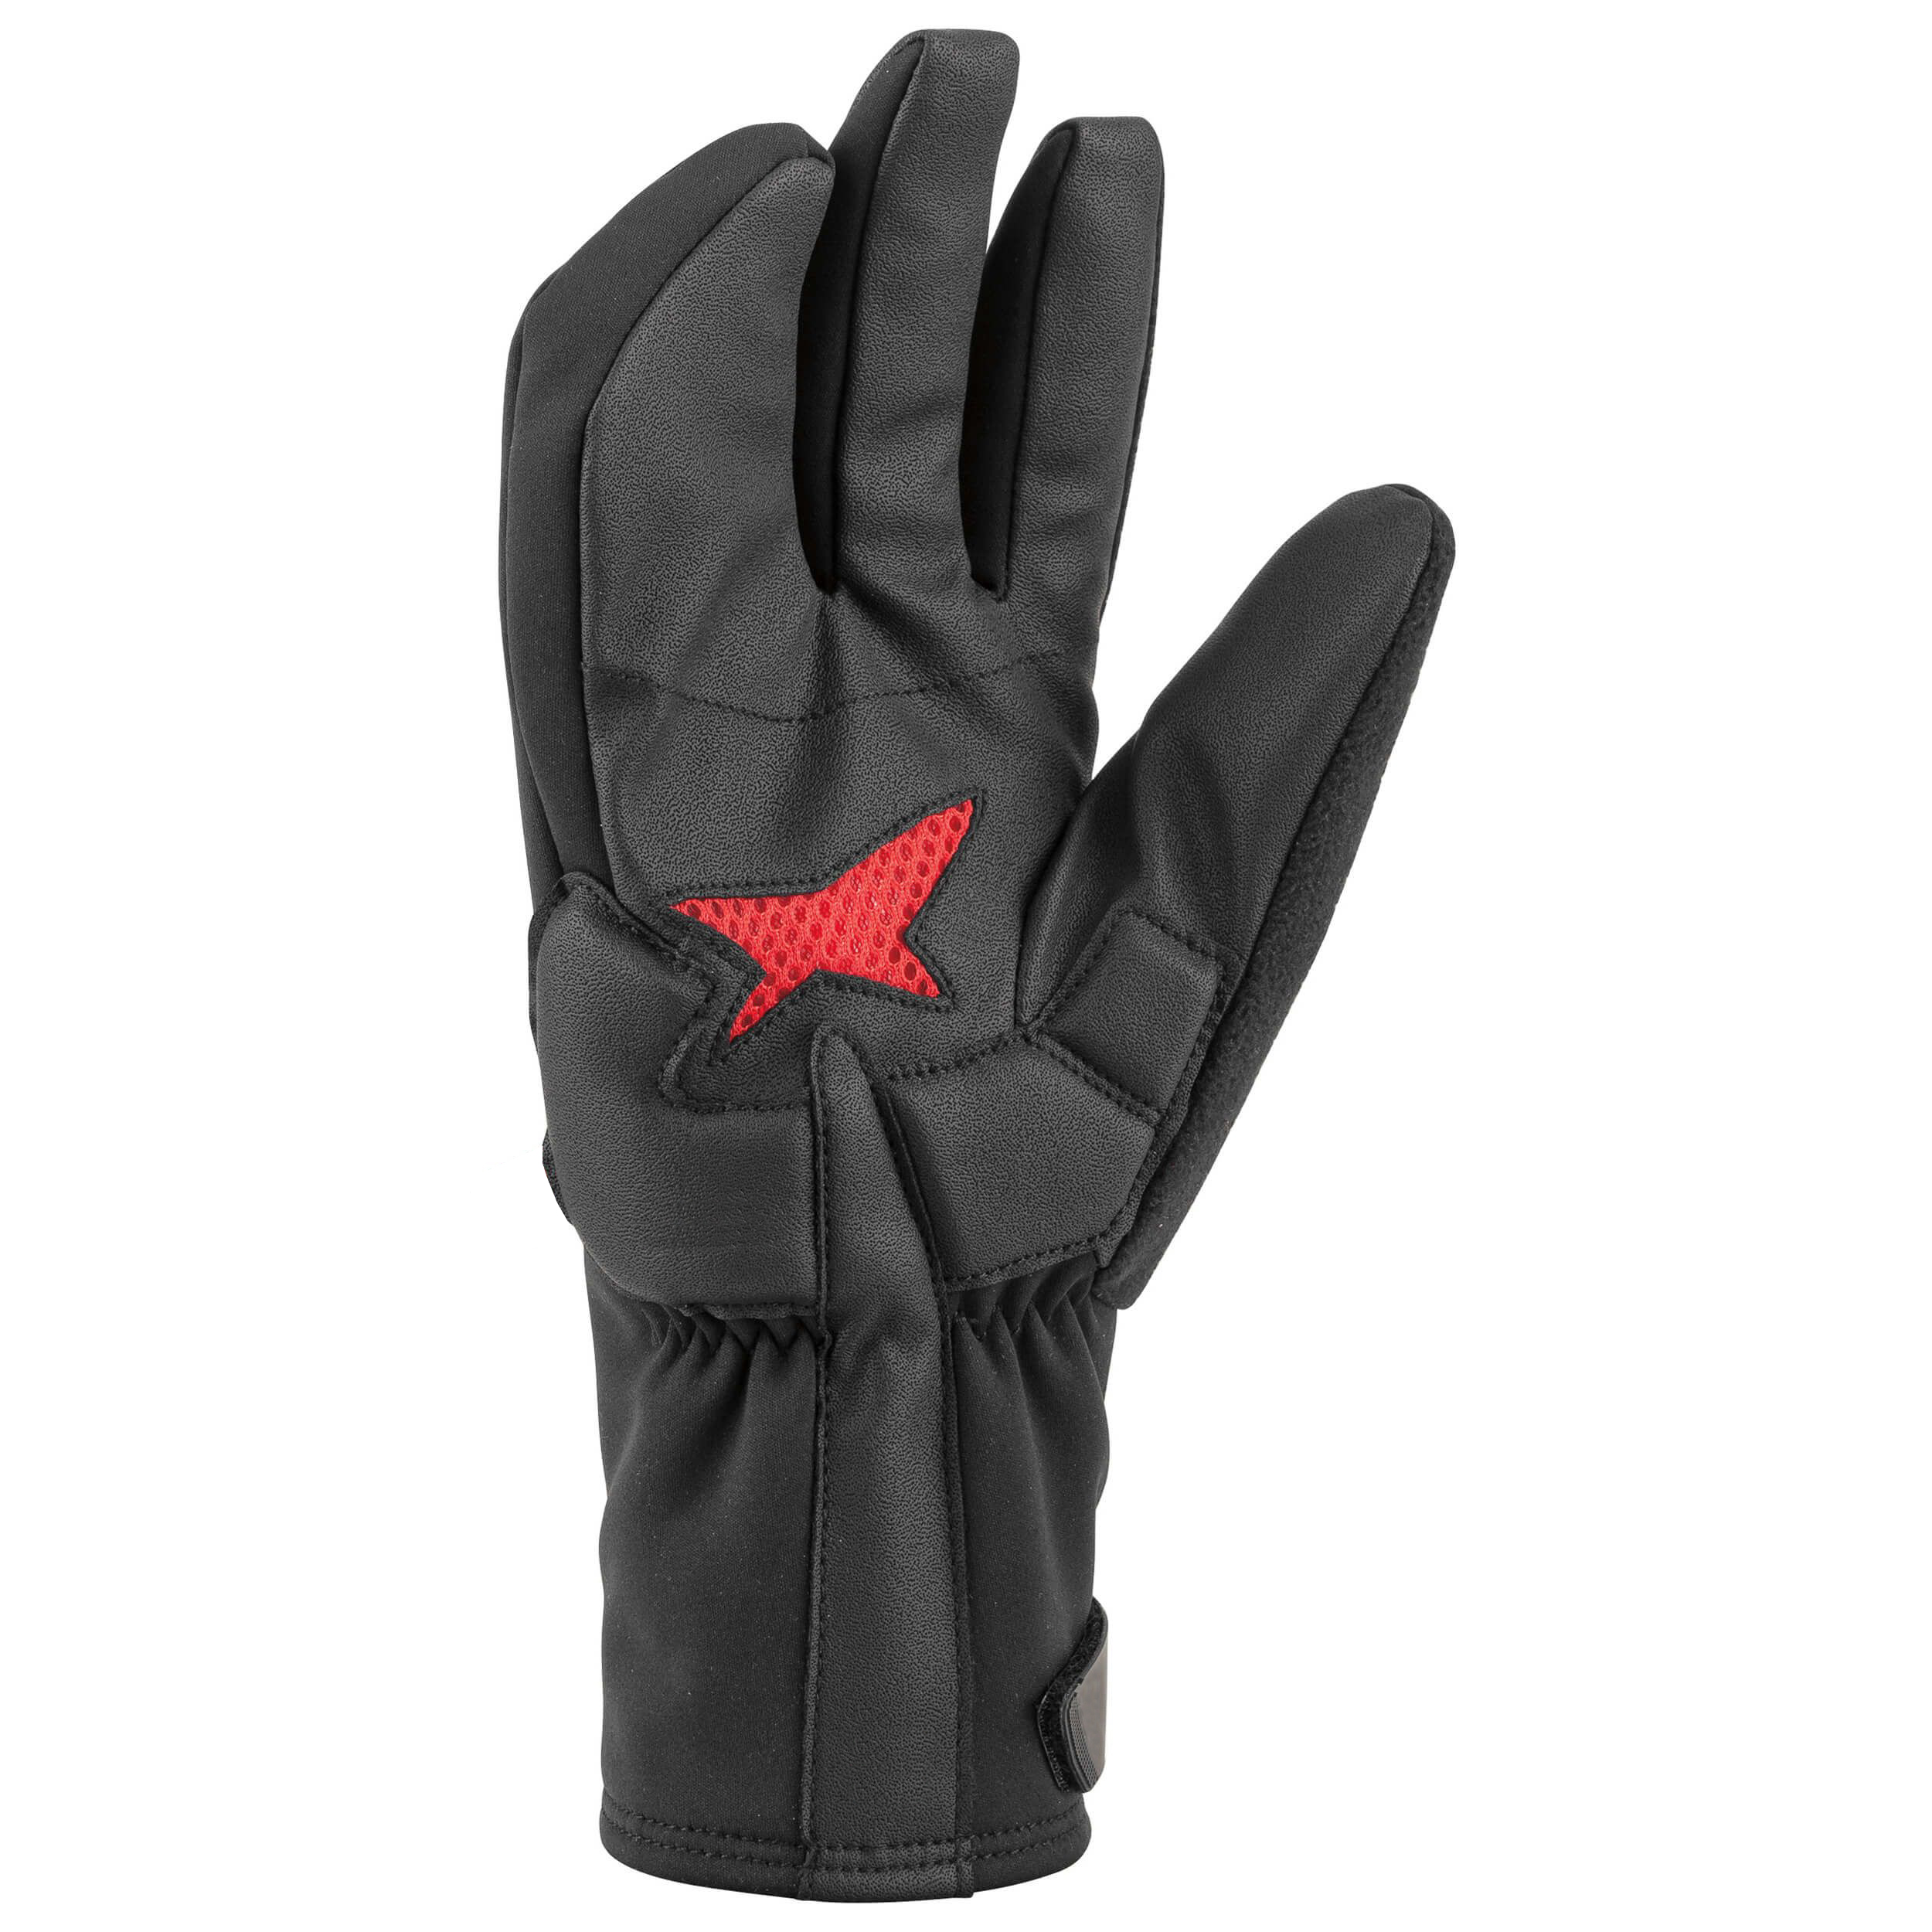 Water&windproof Gel padding shock-absorbing cycling gloves with breathable mesh palm